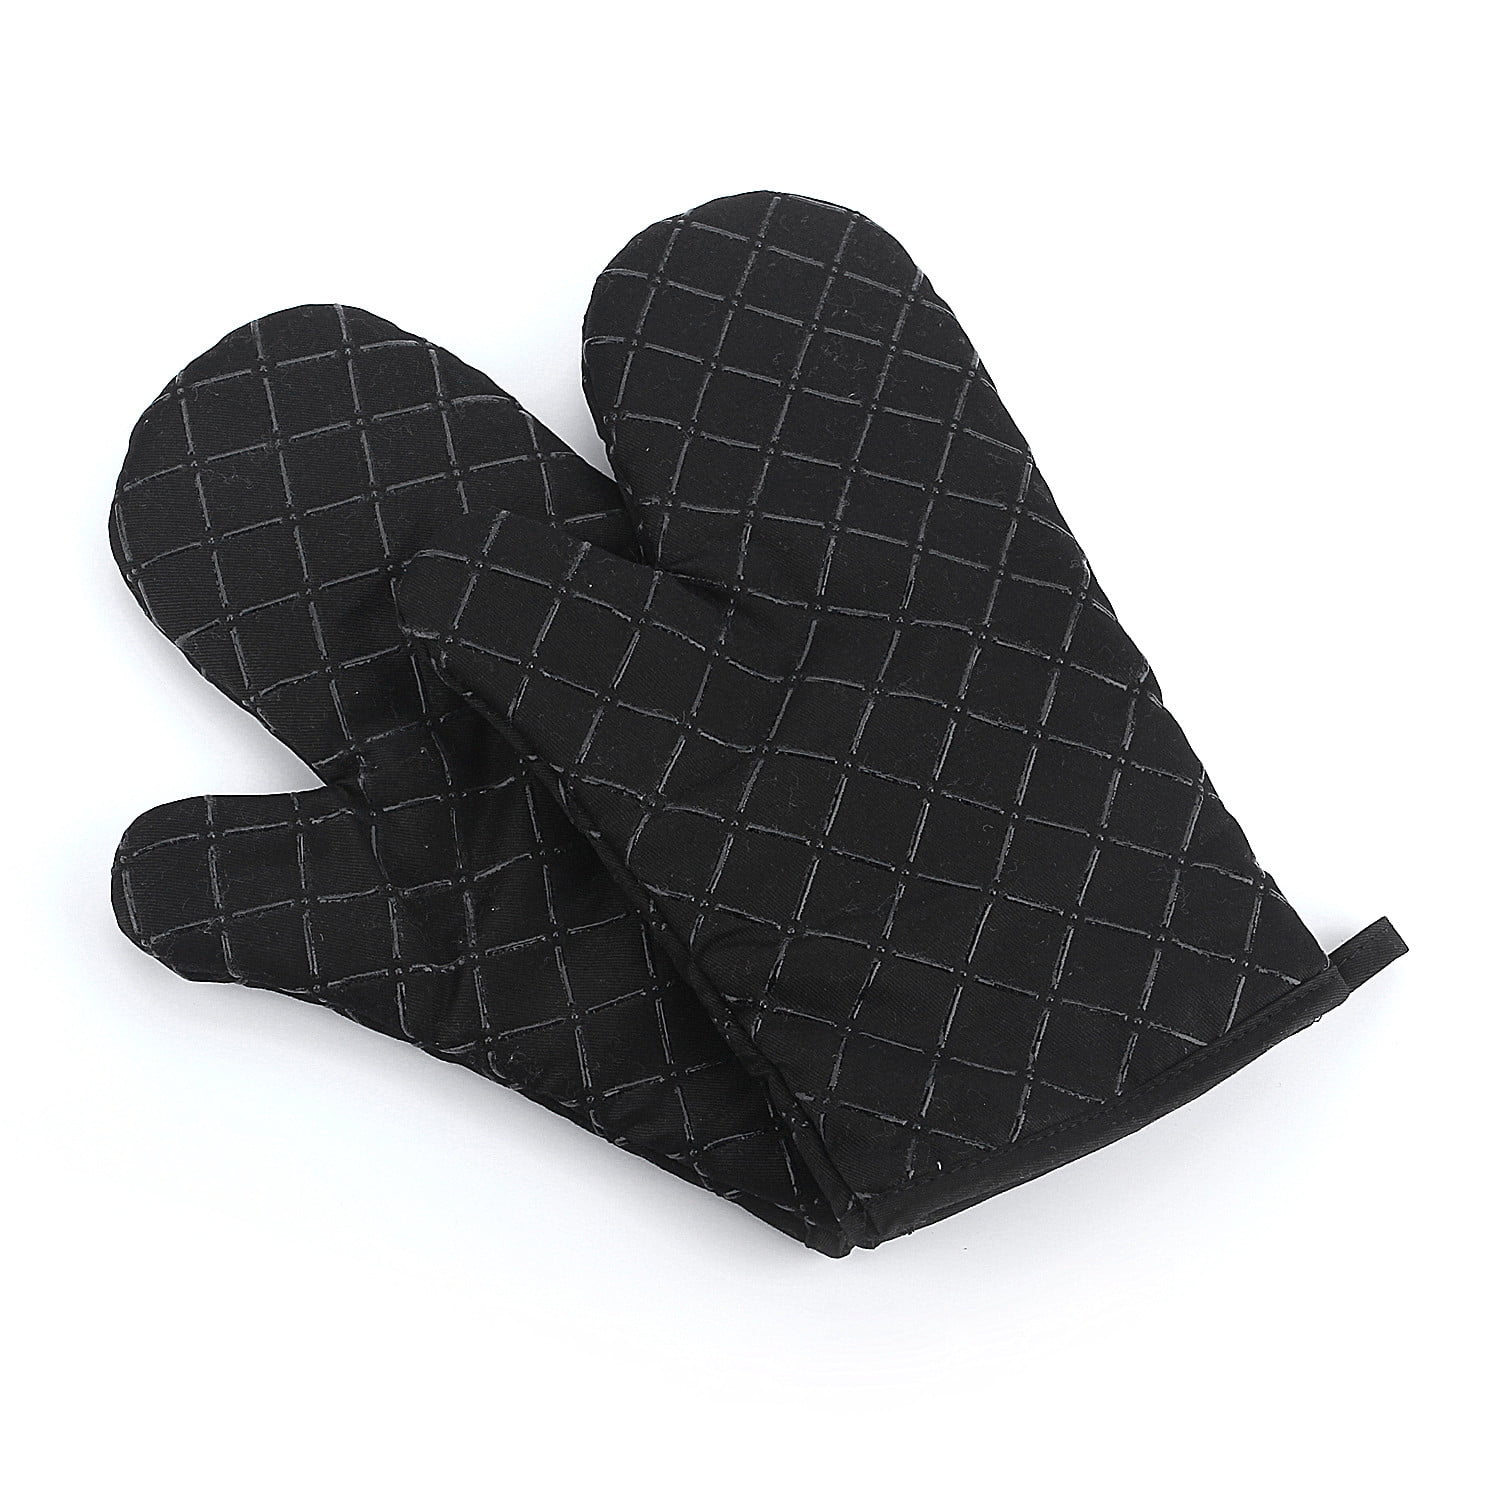 Oven Mitts Flame Retardant Mitts Heat Resistant to 425 F 15 inch Black Color 2-Pack